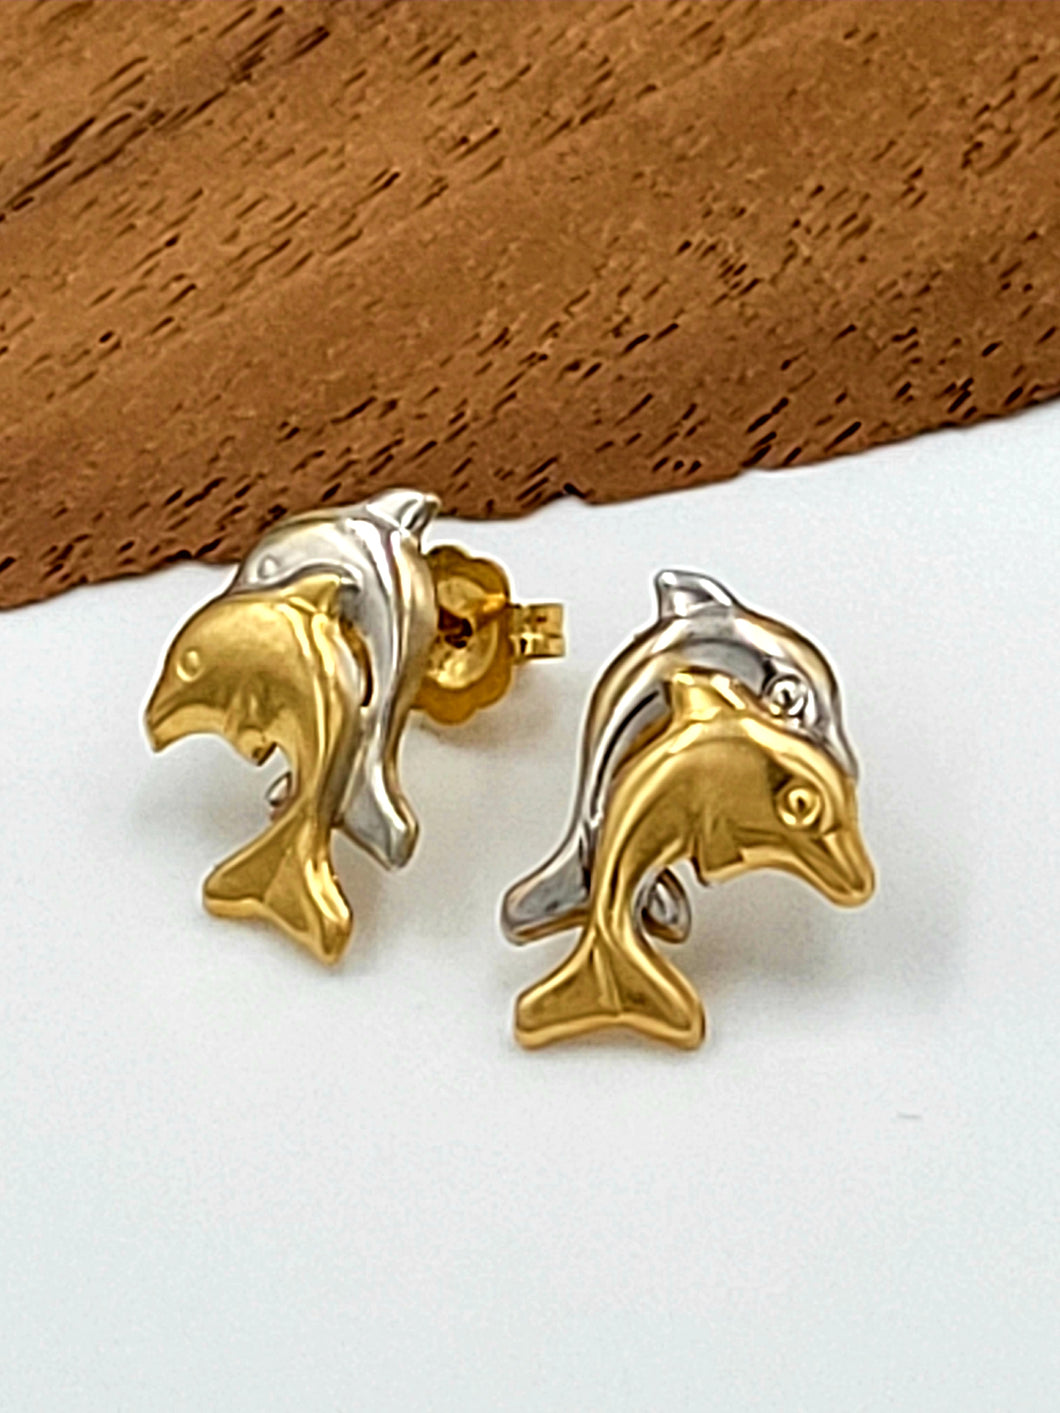 Aggregate 230+ gold dolphin earrings best